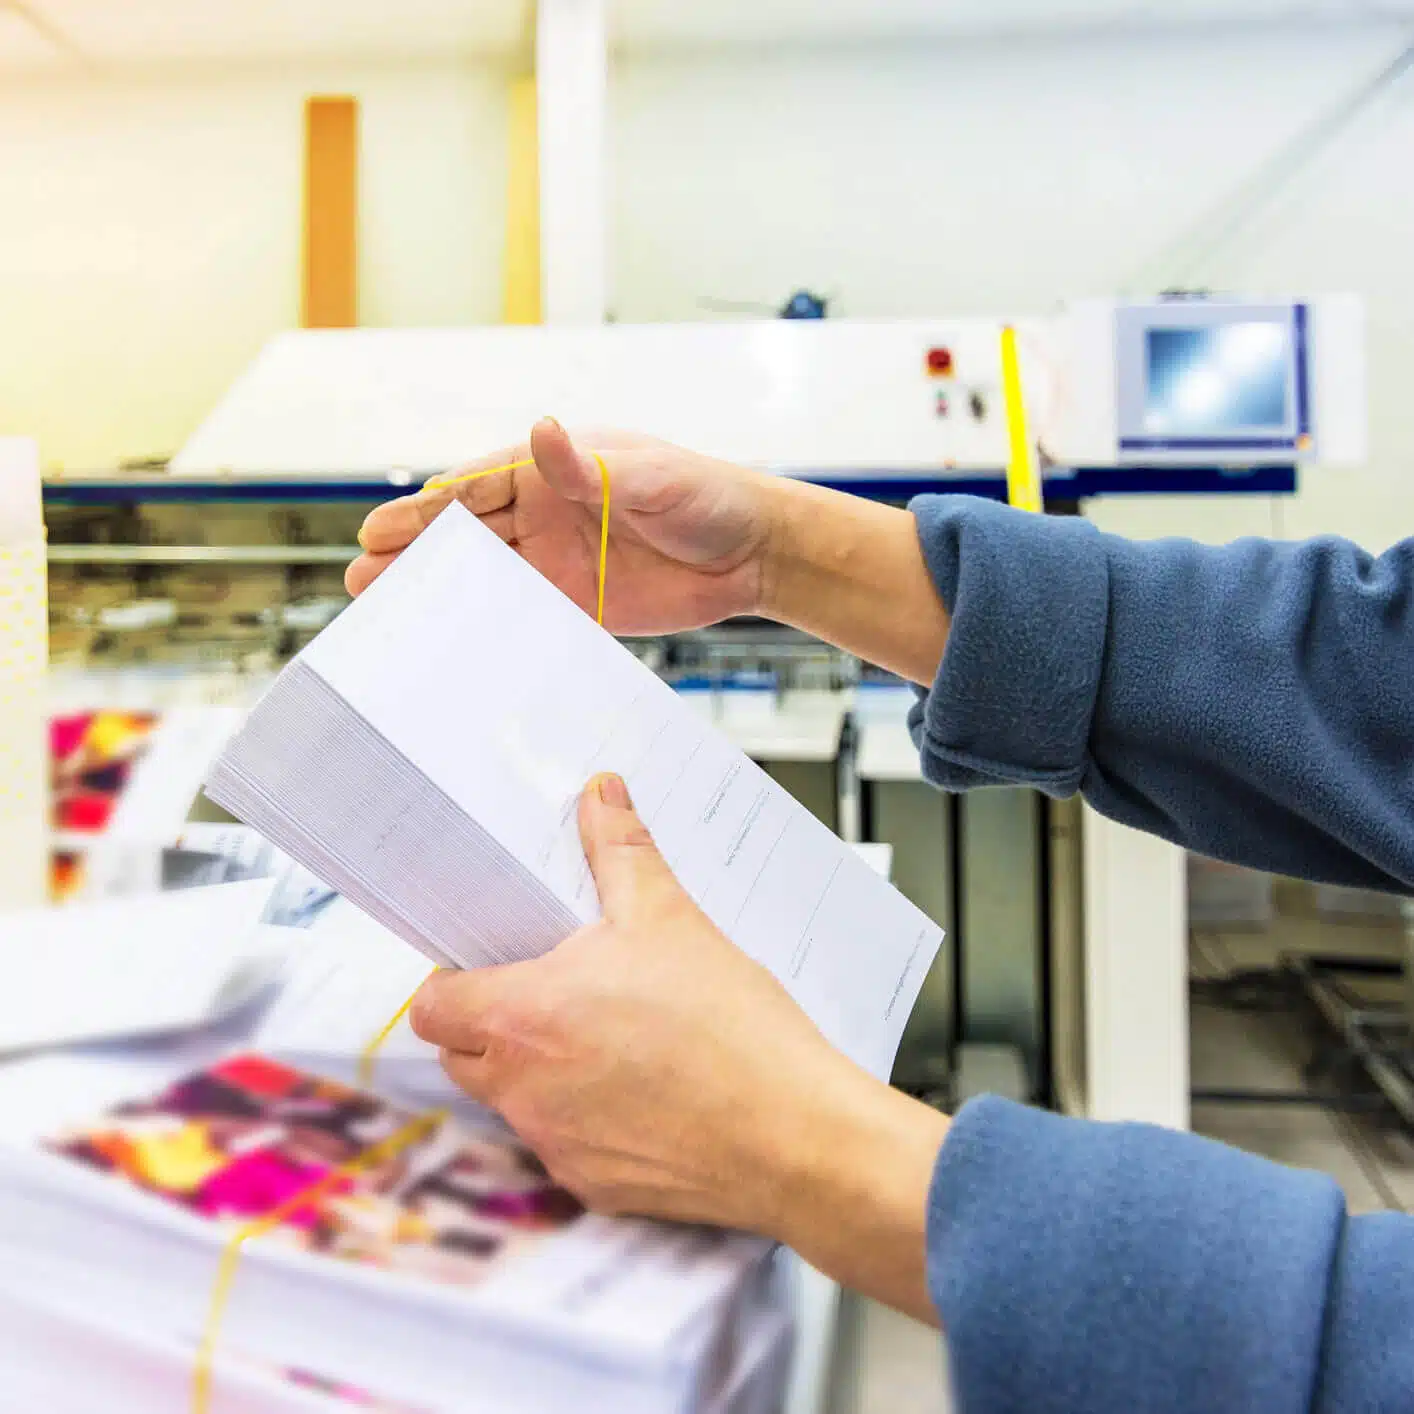 zensmart is showing A person in a blue sleeve is holding a stack of printed papers bound together by a yellow rubber band in a printing facility. The background shows blurred machinery and more stacks of direct mail materials. with print workflow automation